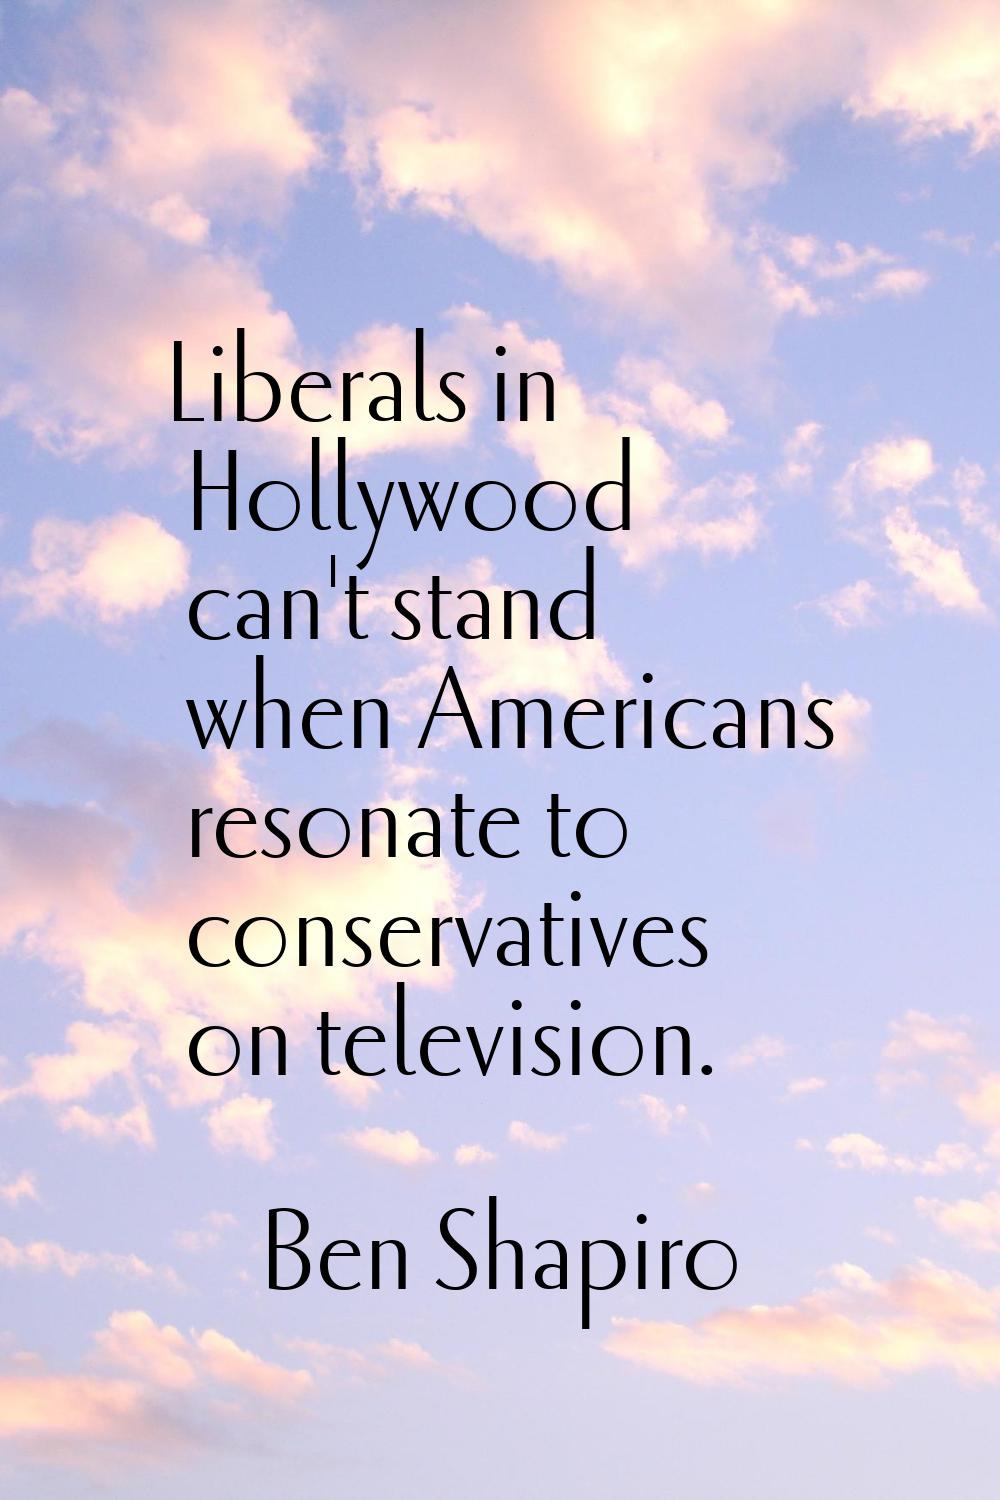 Liberals in Hollywood can't stand when Americans resonate to conservatives on television.